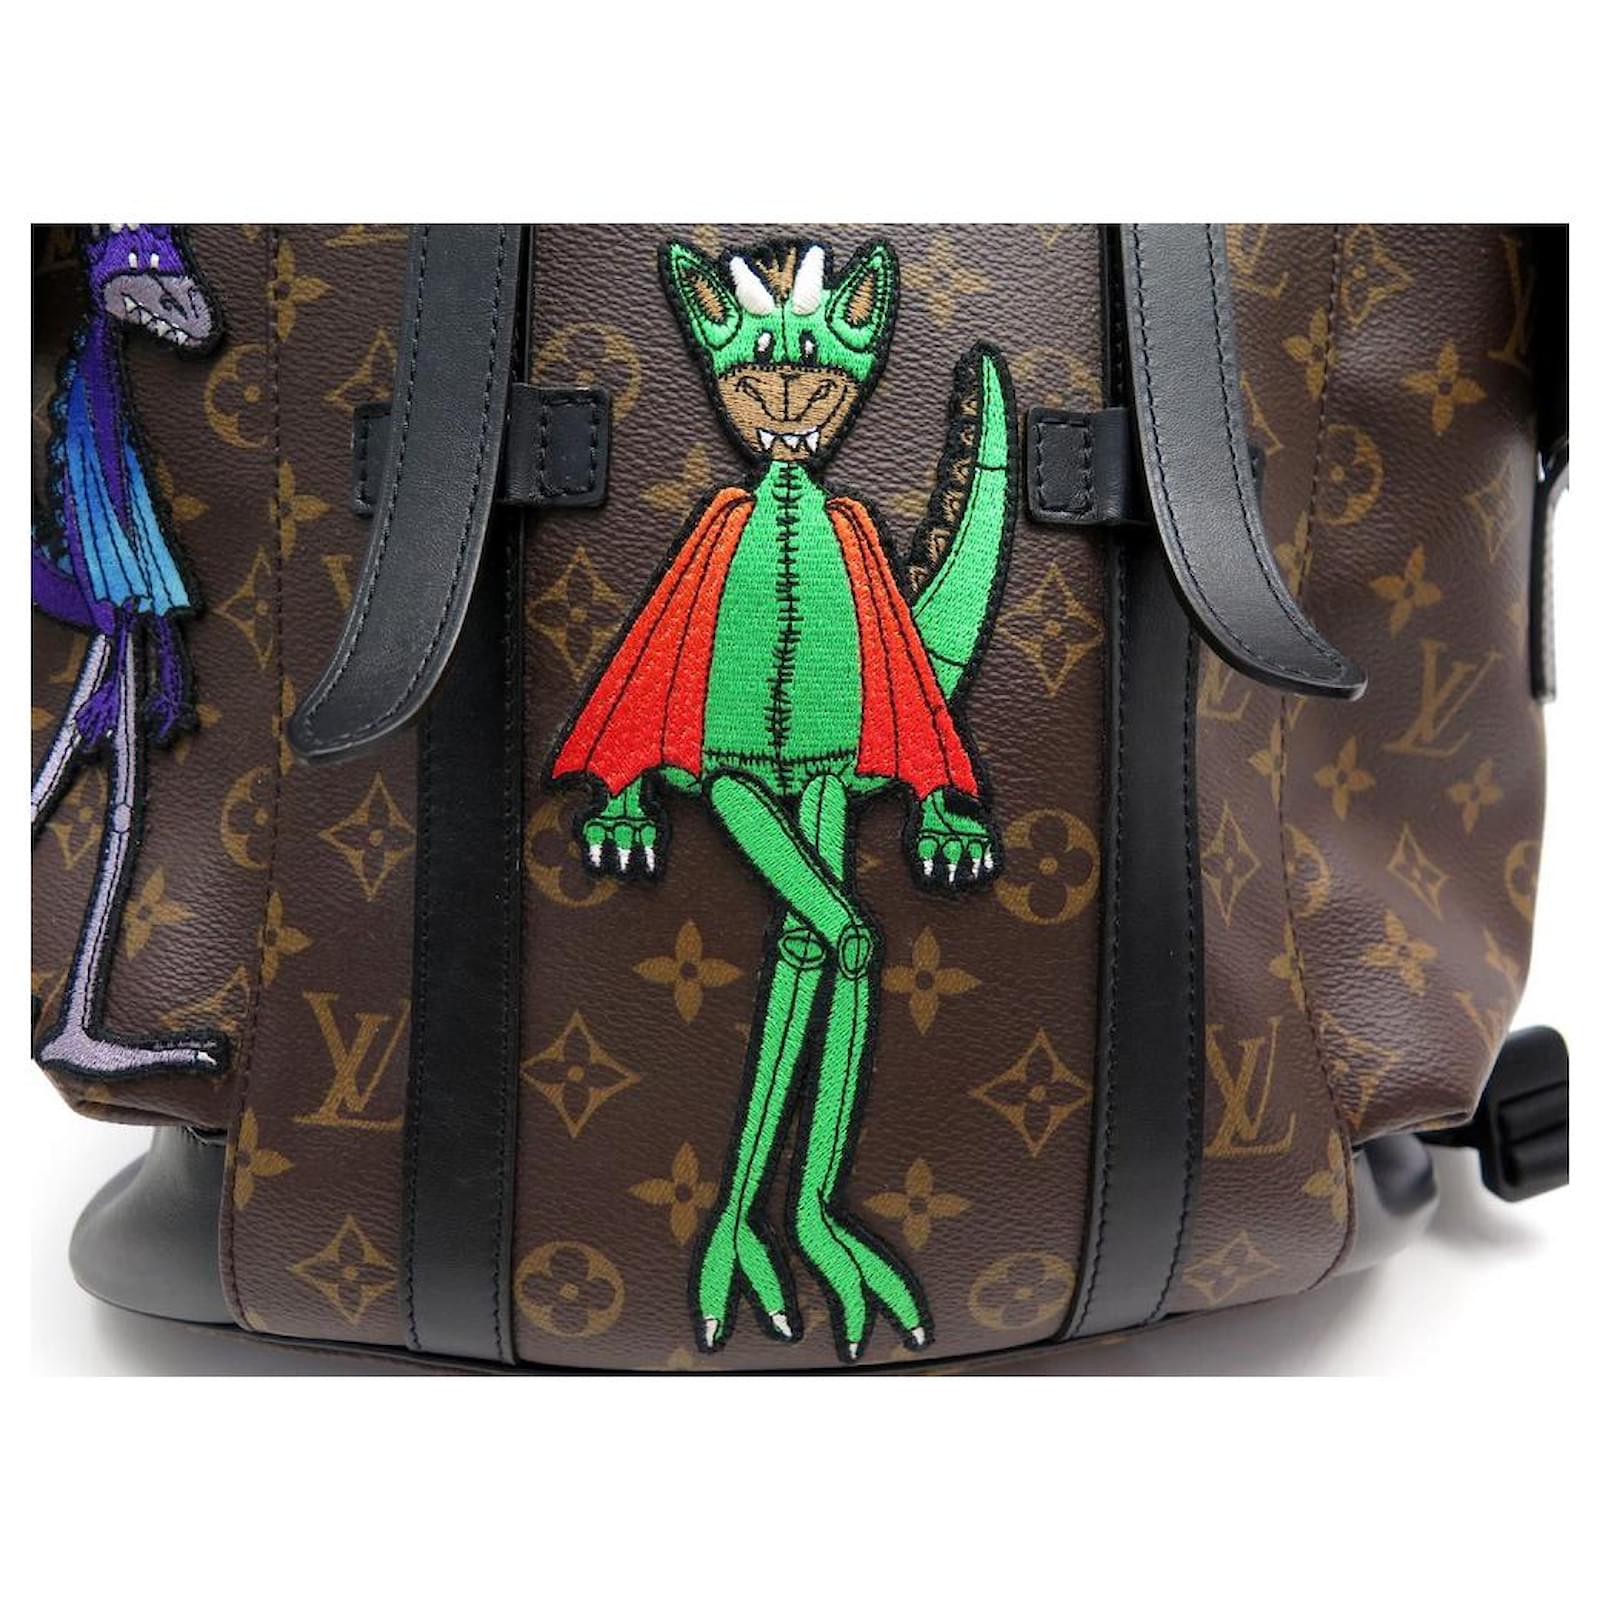 My My Louis Iconic Louis Vuitton Christopher Backpack Mylouis.com